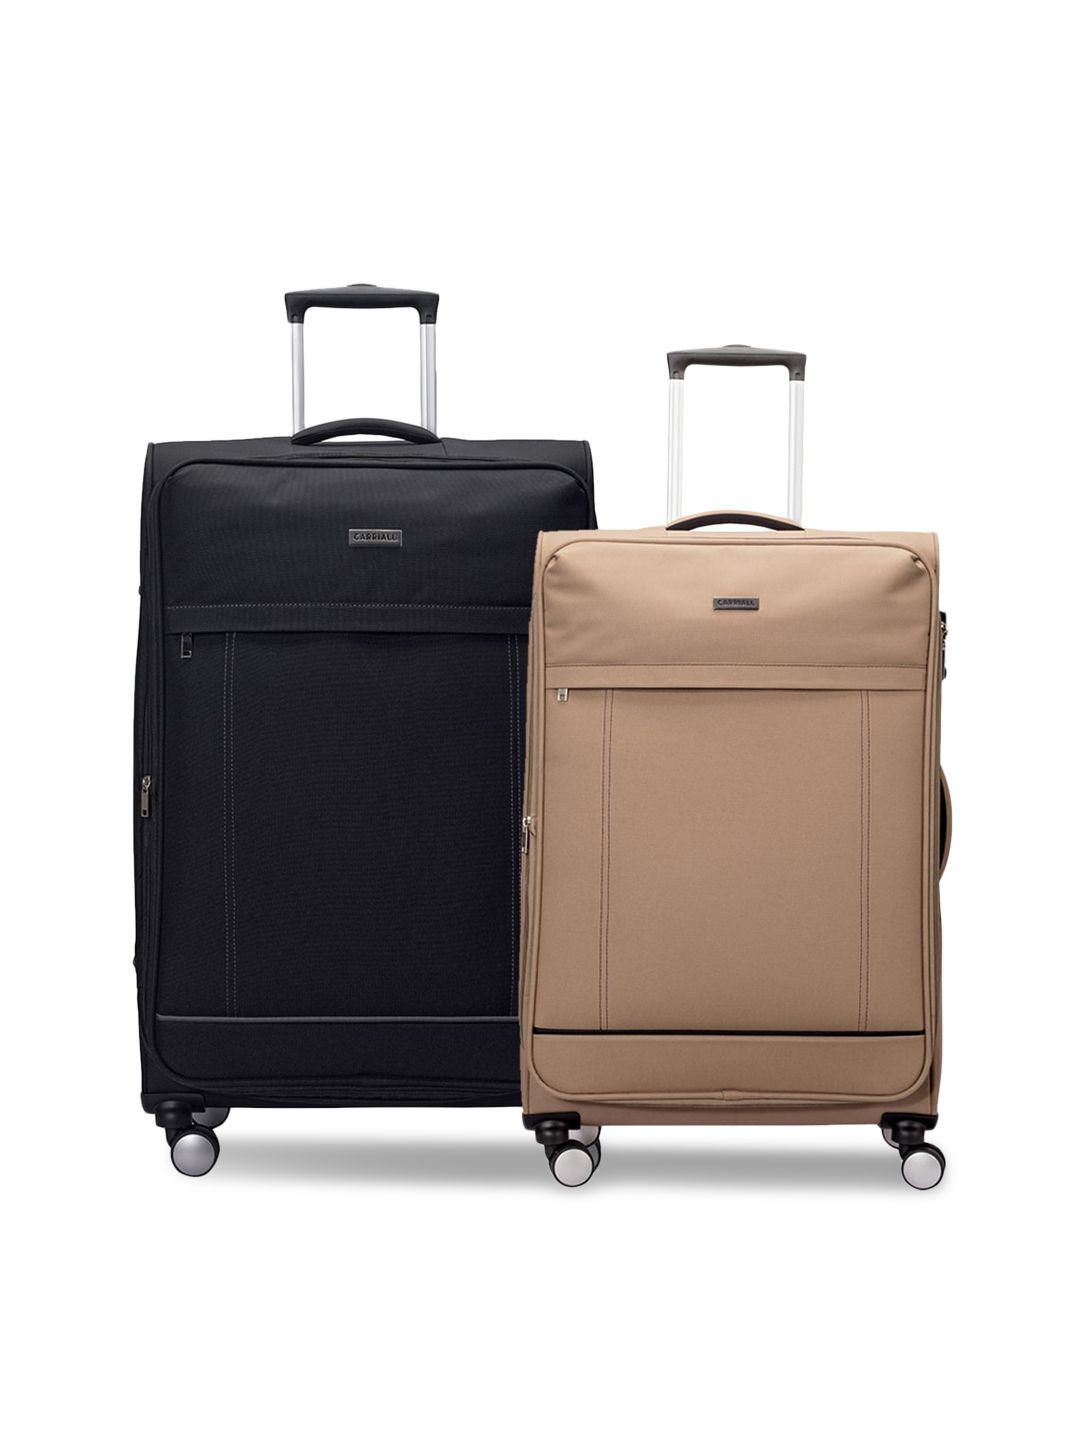 CARRIALL Pack of 2 Black & Beige Large & Medium Luggage Trolley Price in India